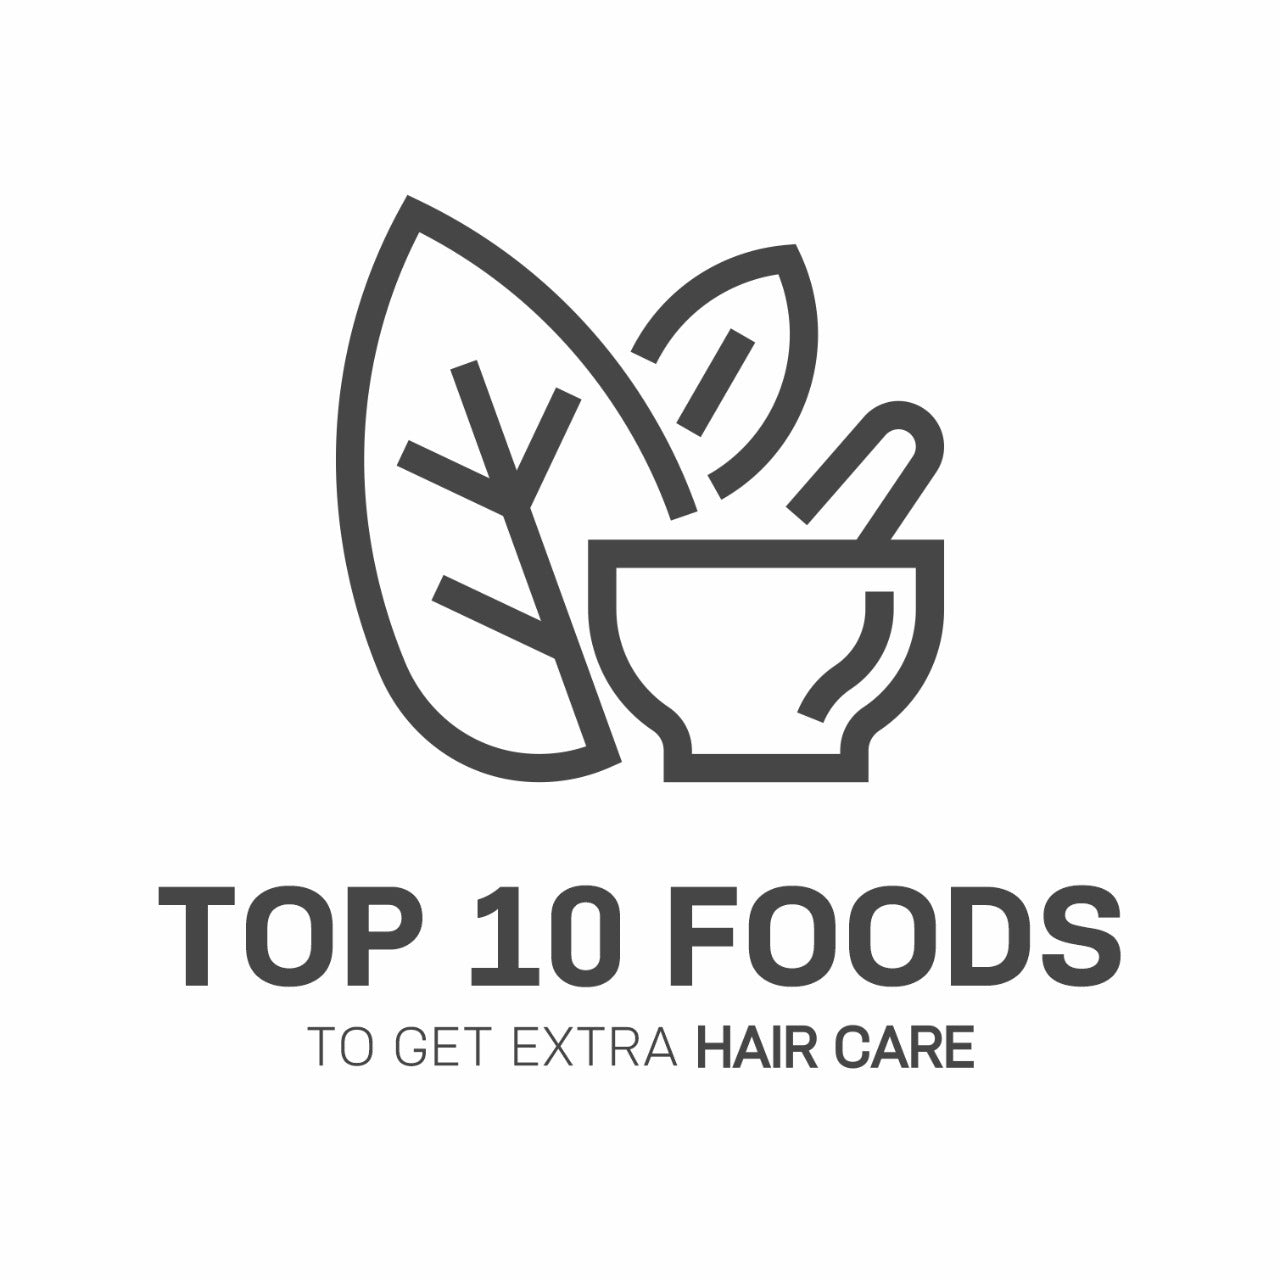 Top 10 foods to get extra hair care